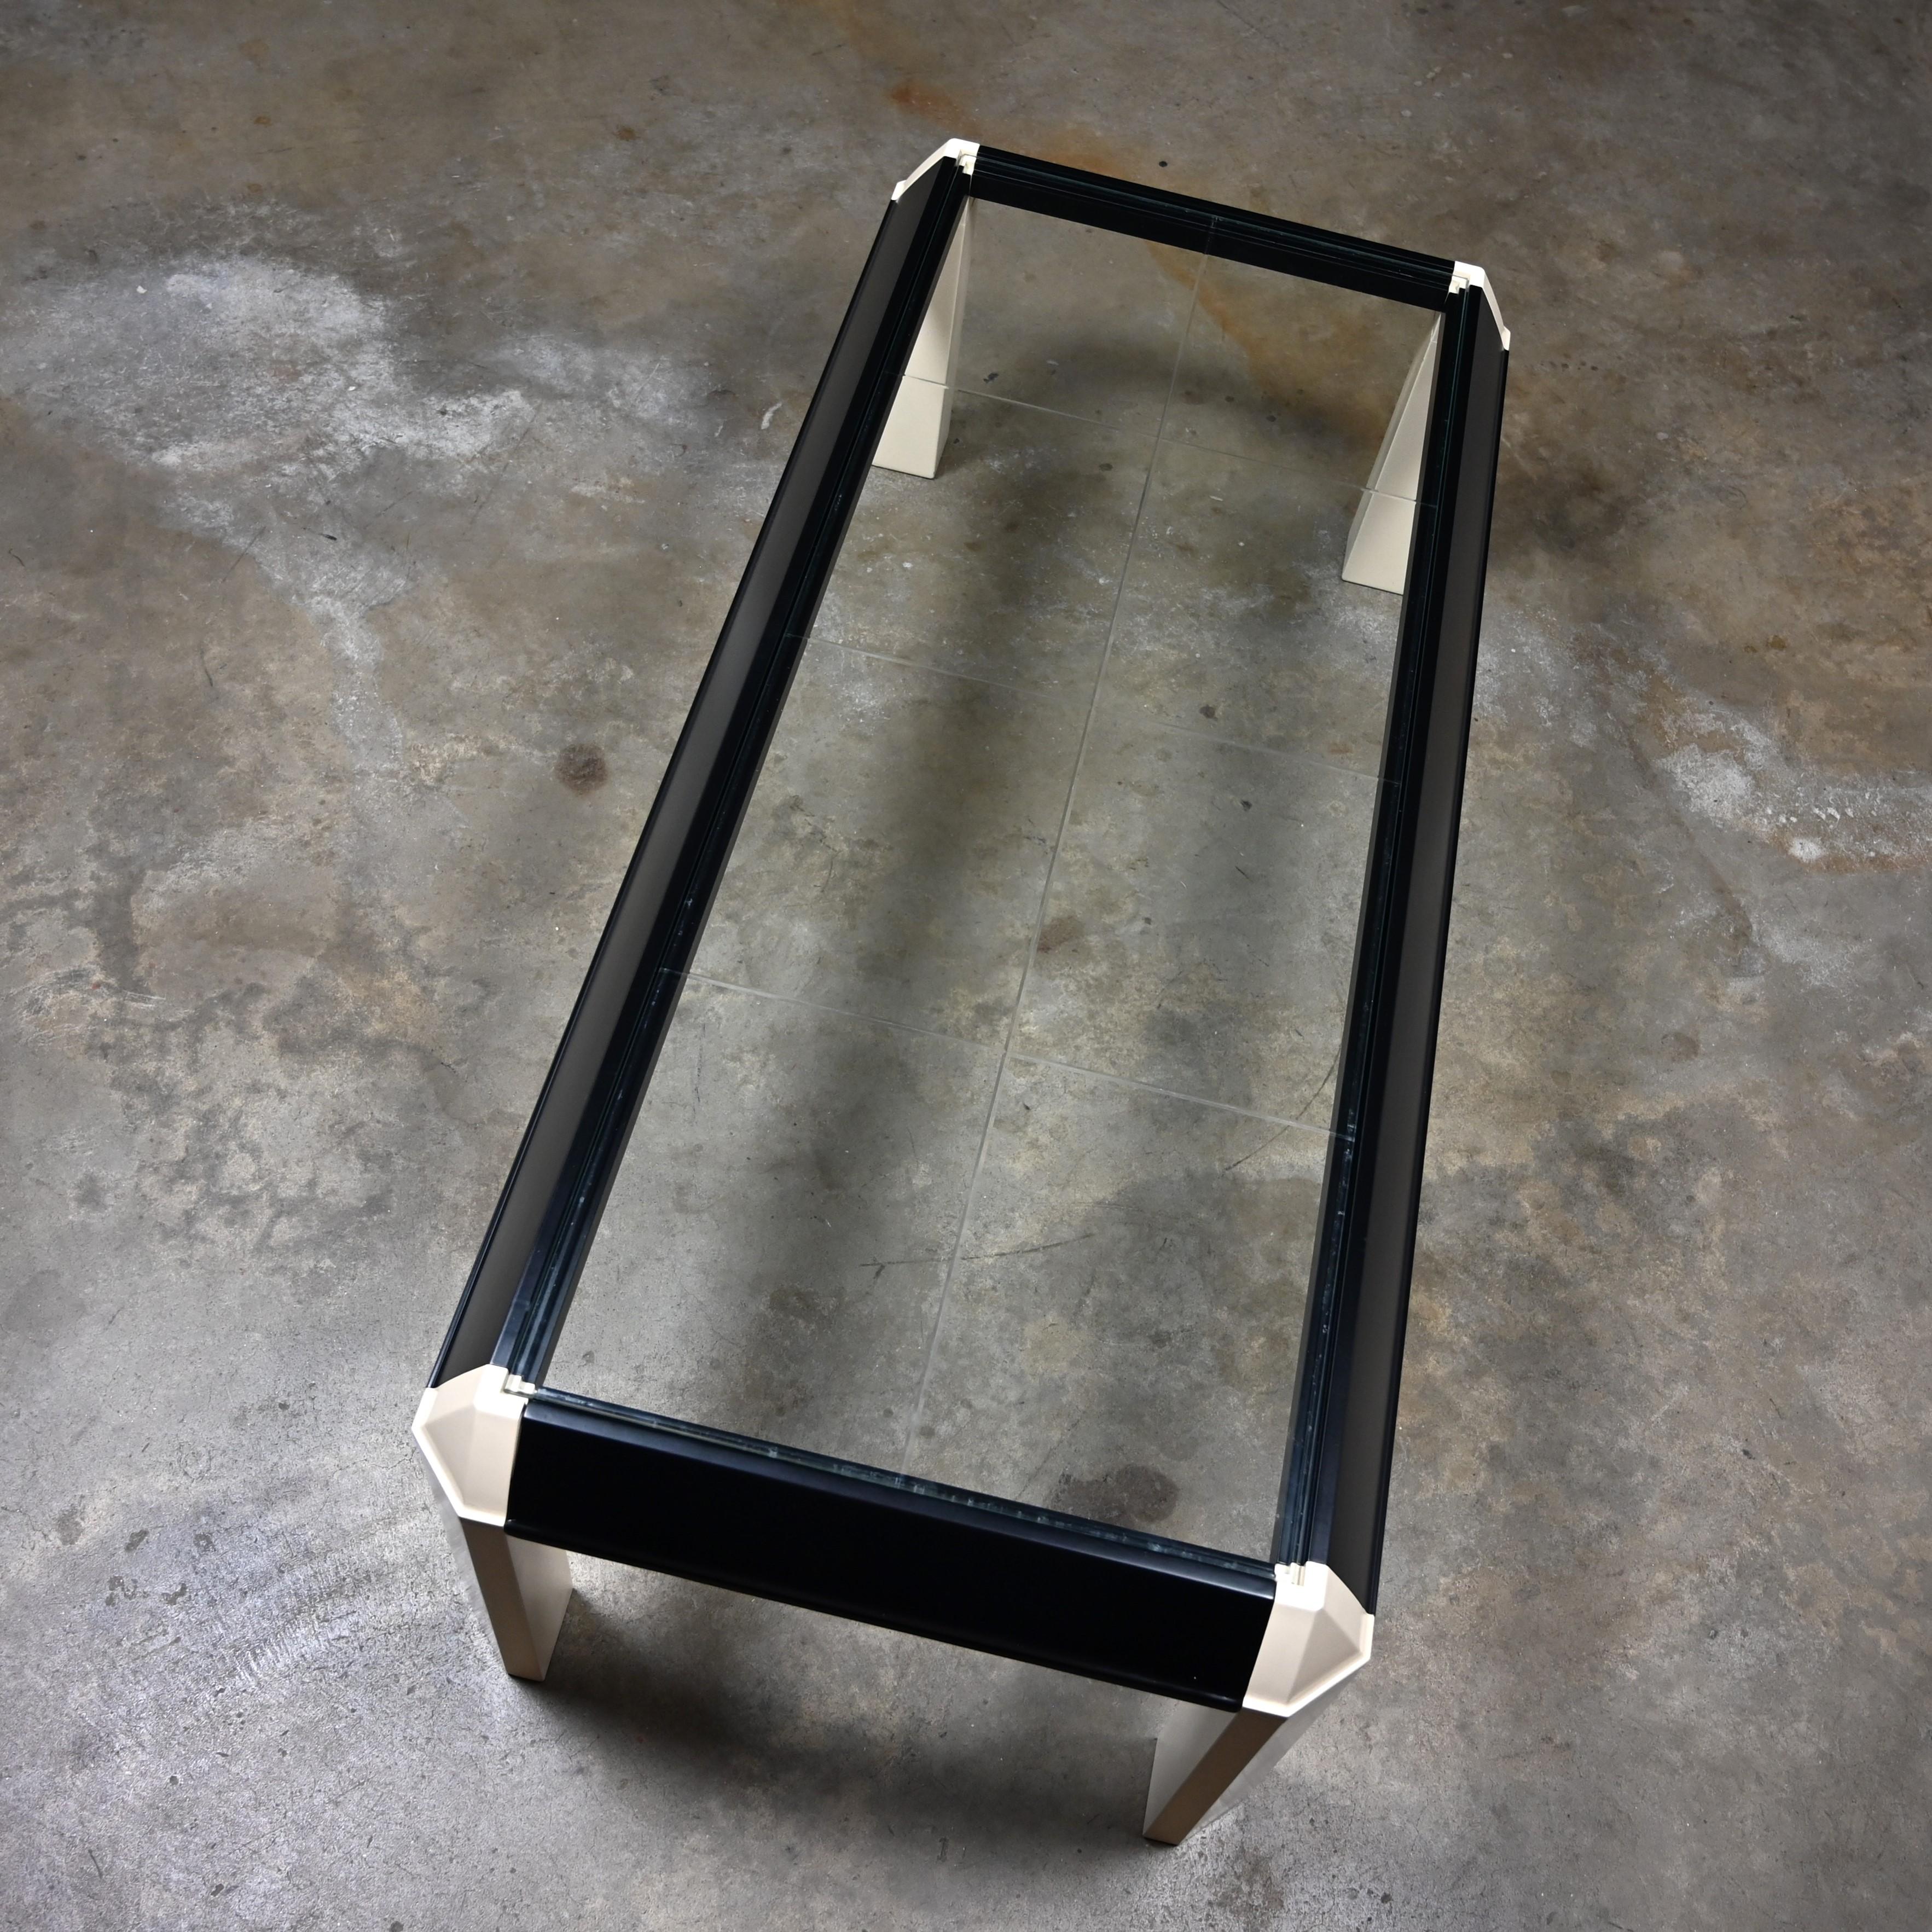 Postmodern Coffee Table Black Painted Frame Off White Trapezoid Legs Glass Top In Good Condition For Sale In Topeka, KS